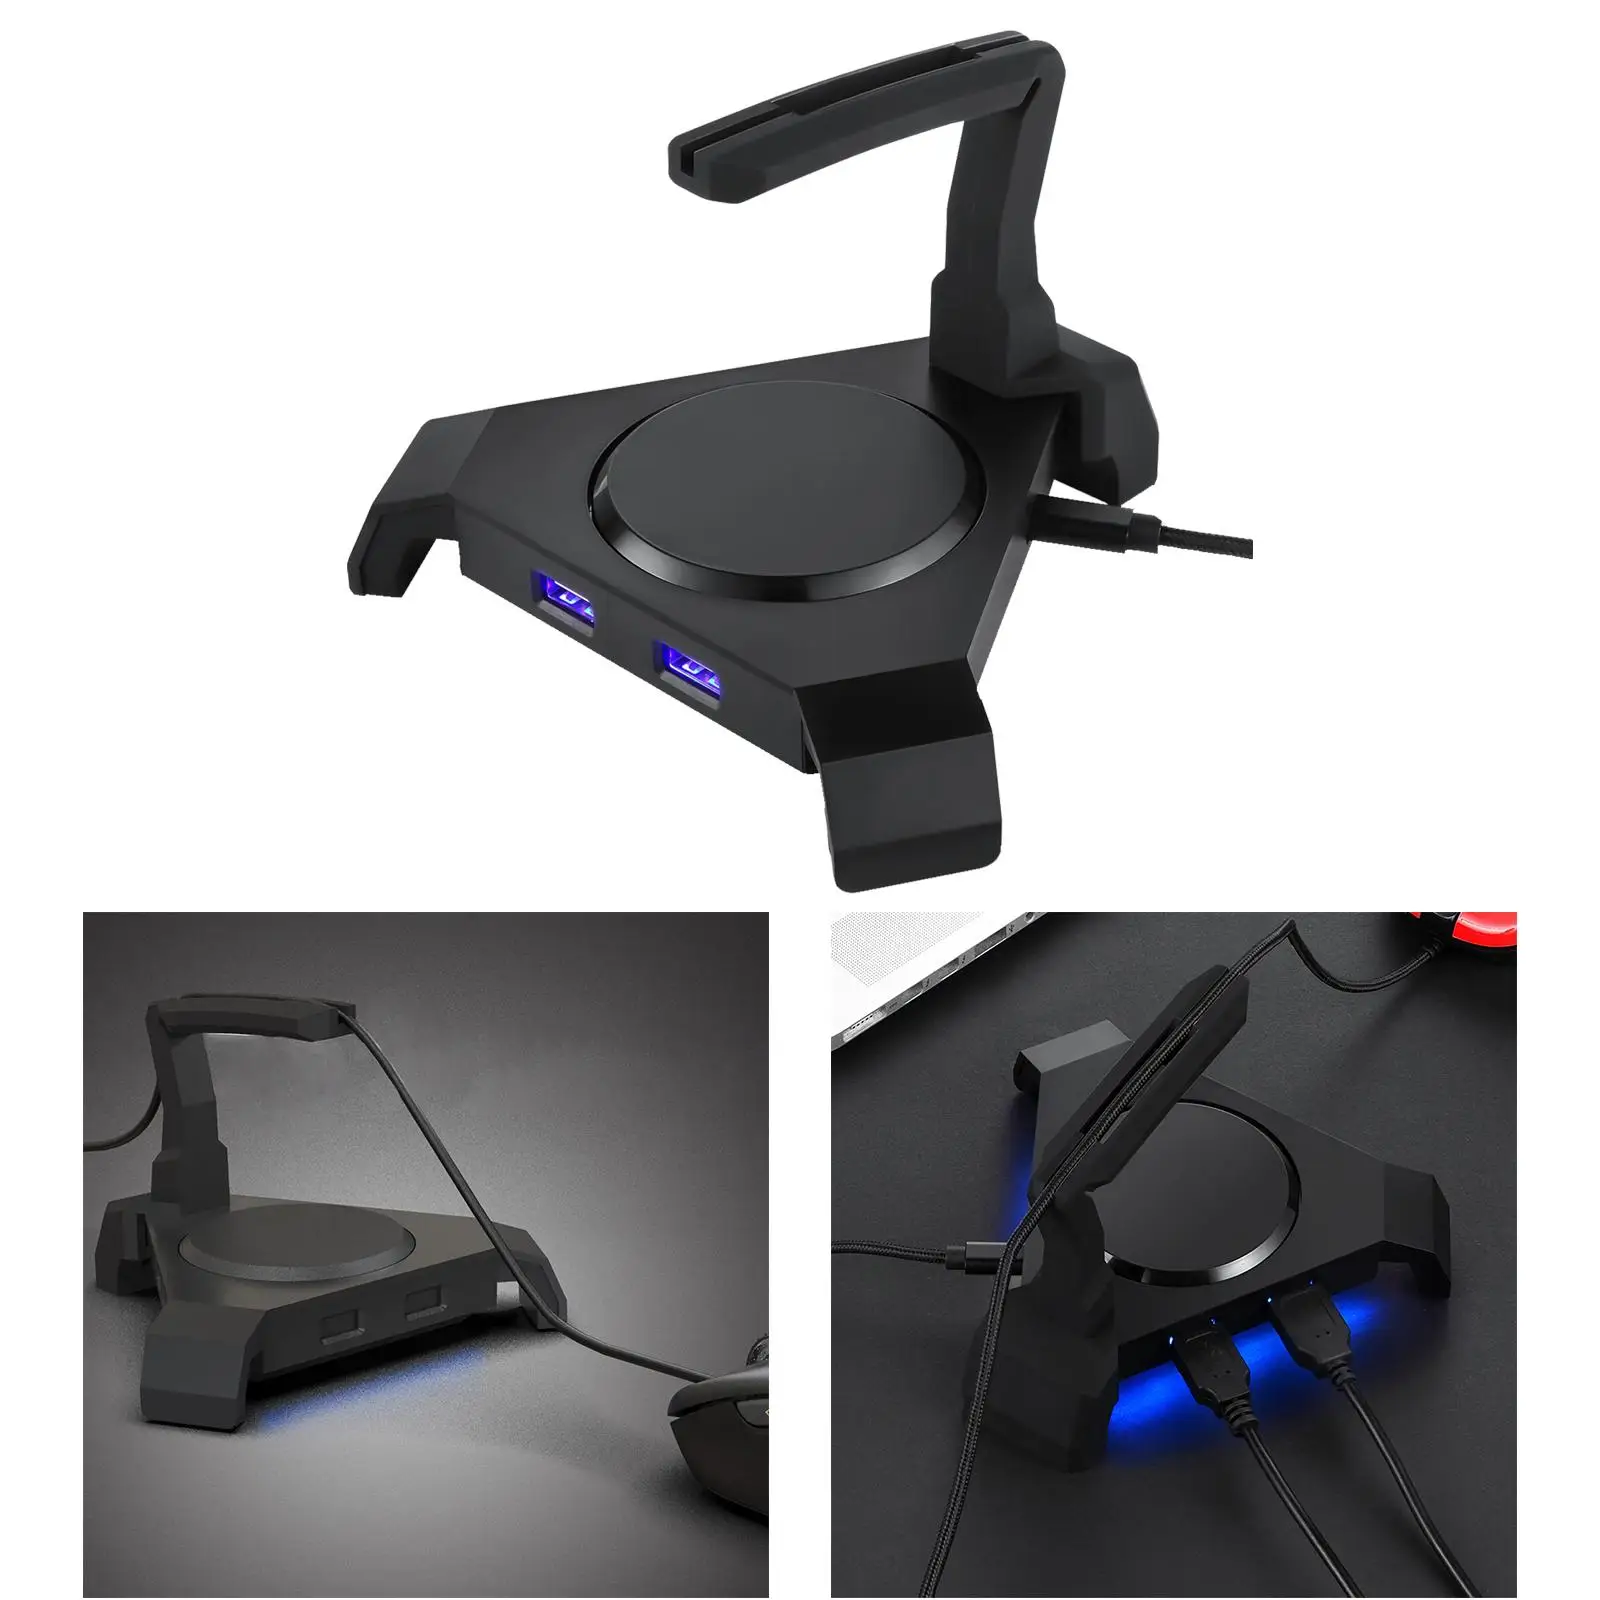 Q20 Gaming Mouse Bungee Cable Holder 4 Port Type C PC Headset Desk Organizer